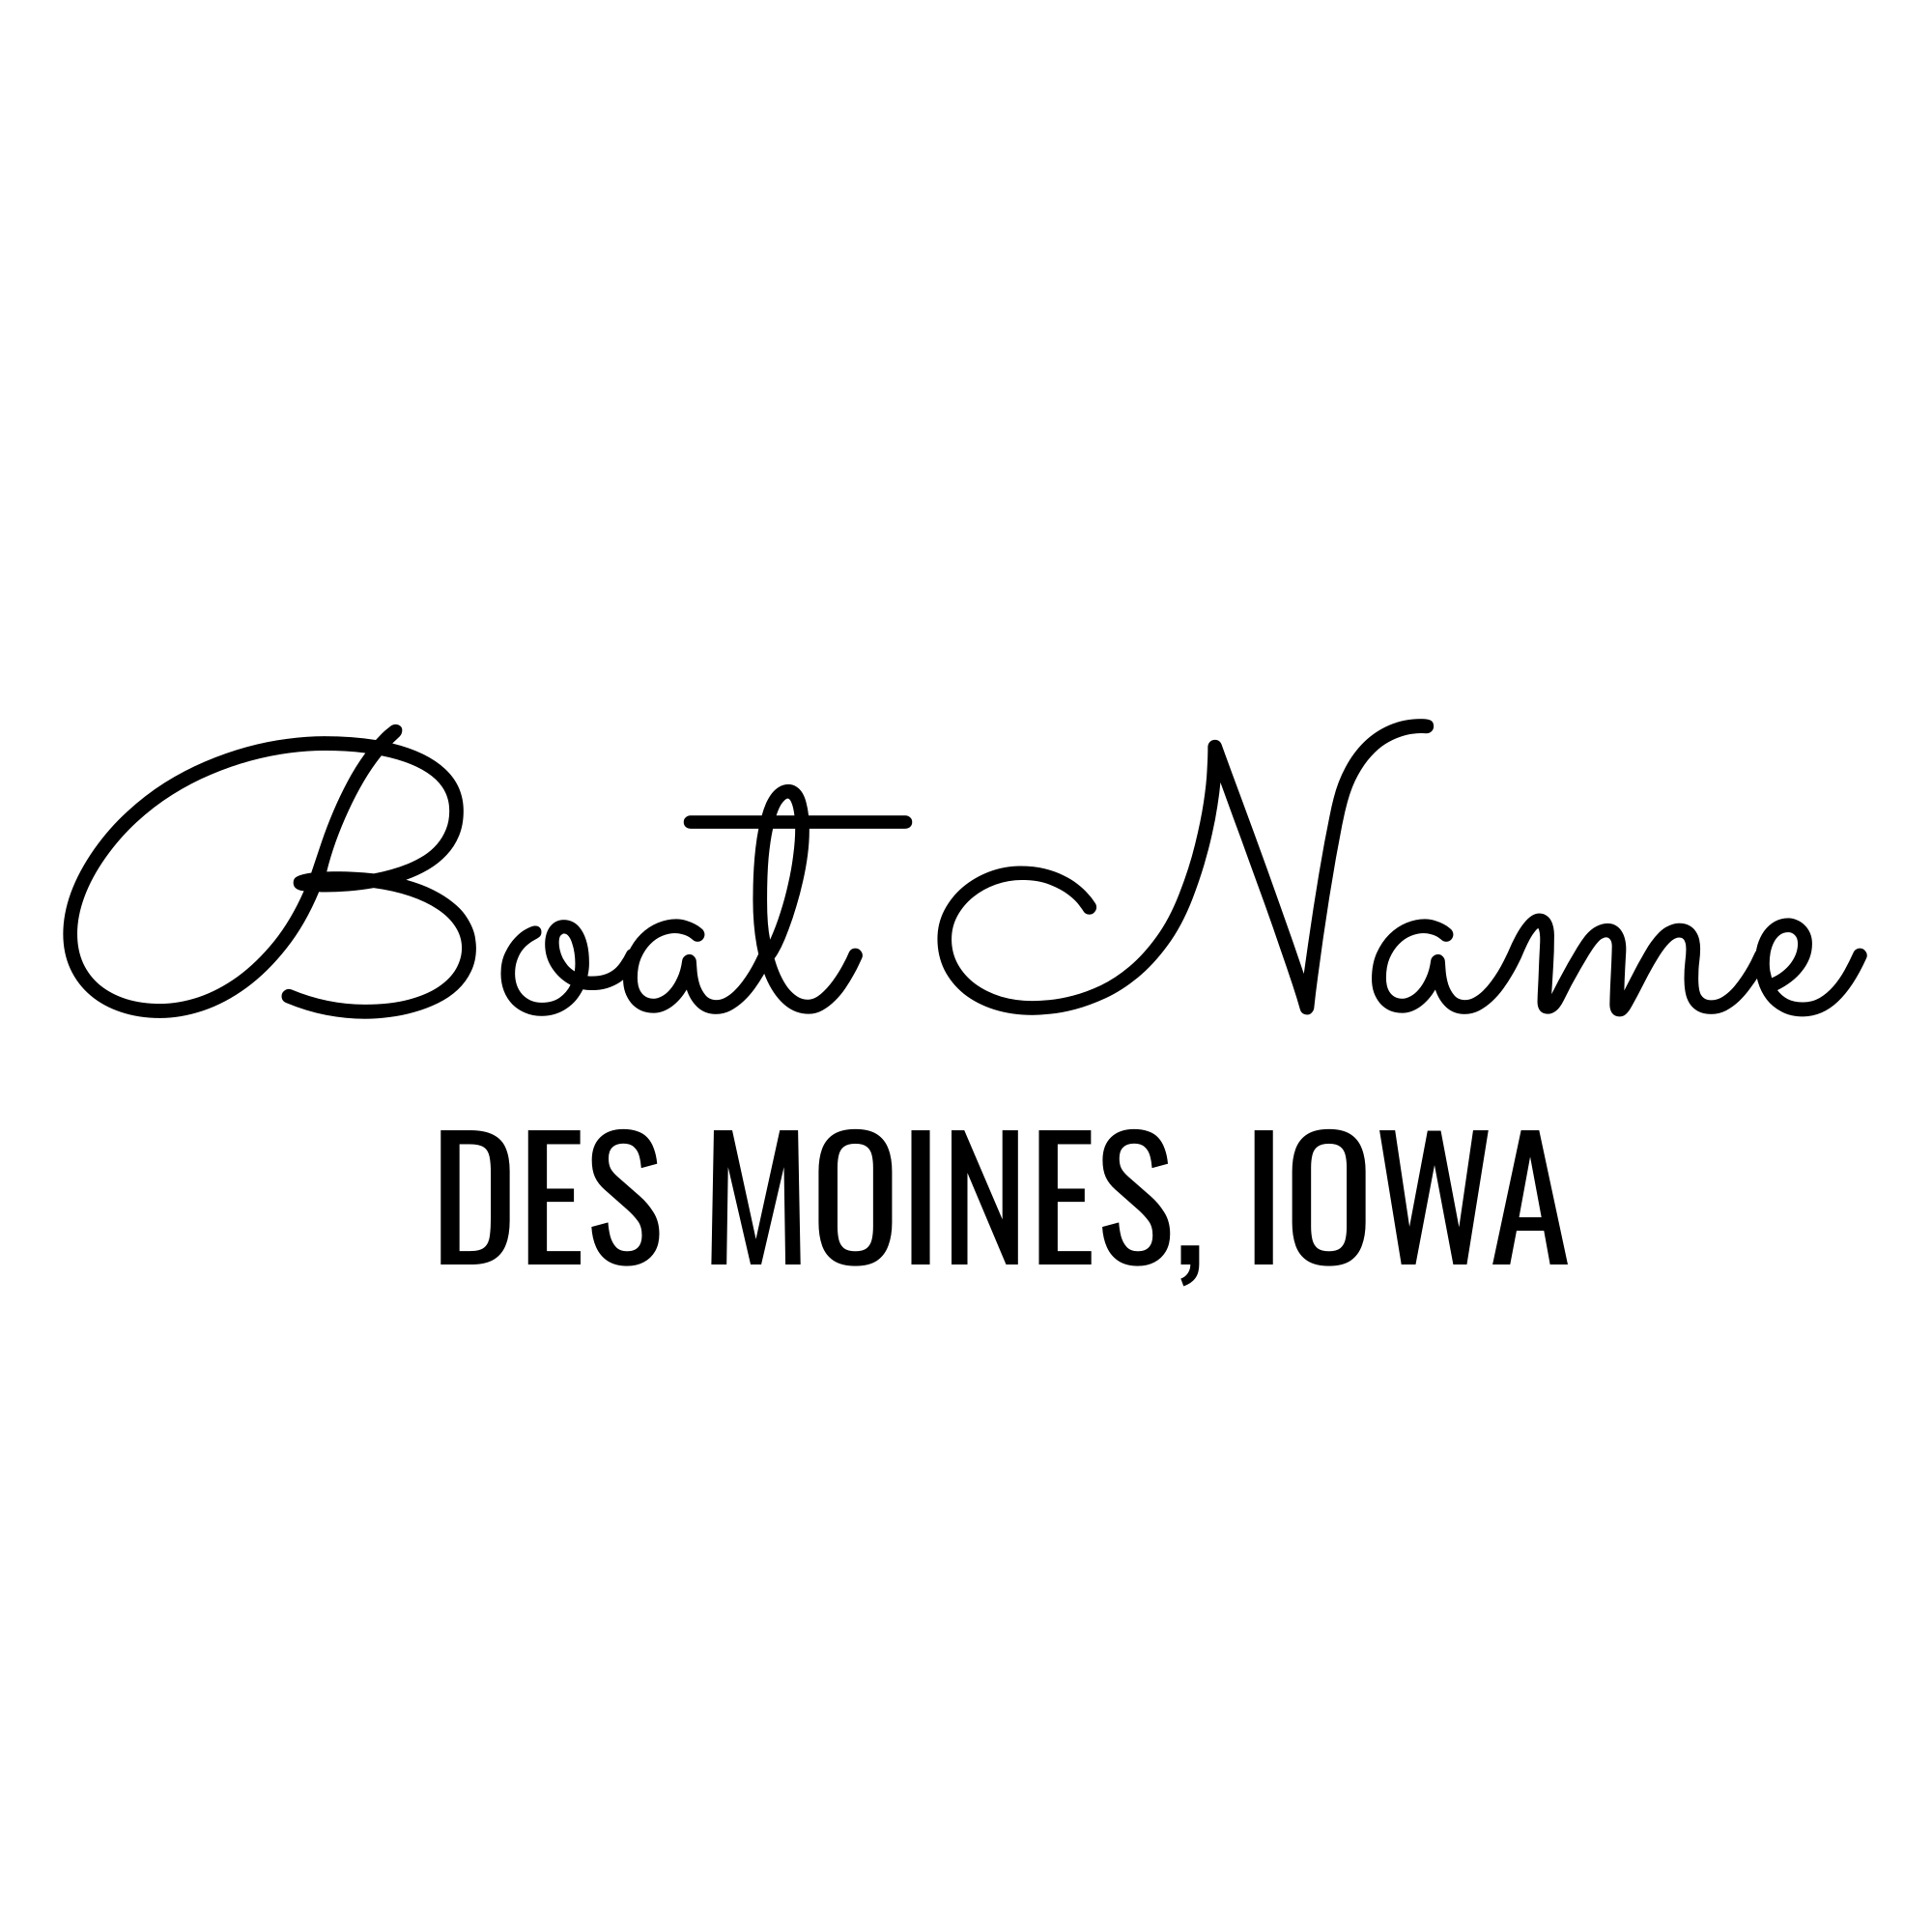 Personalized Boat Name Vinyl Decal with Hailing Port State - Permanent Marine-Grade for Signs, Speed boat, Fishing Vessel, Watercraft C13, B1